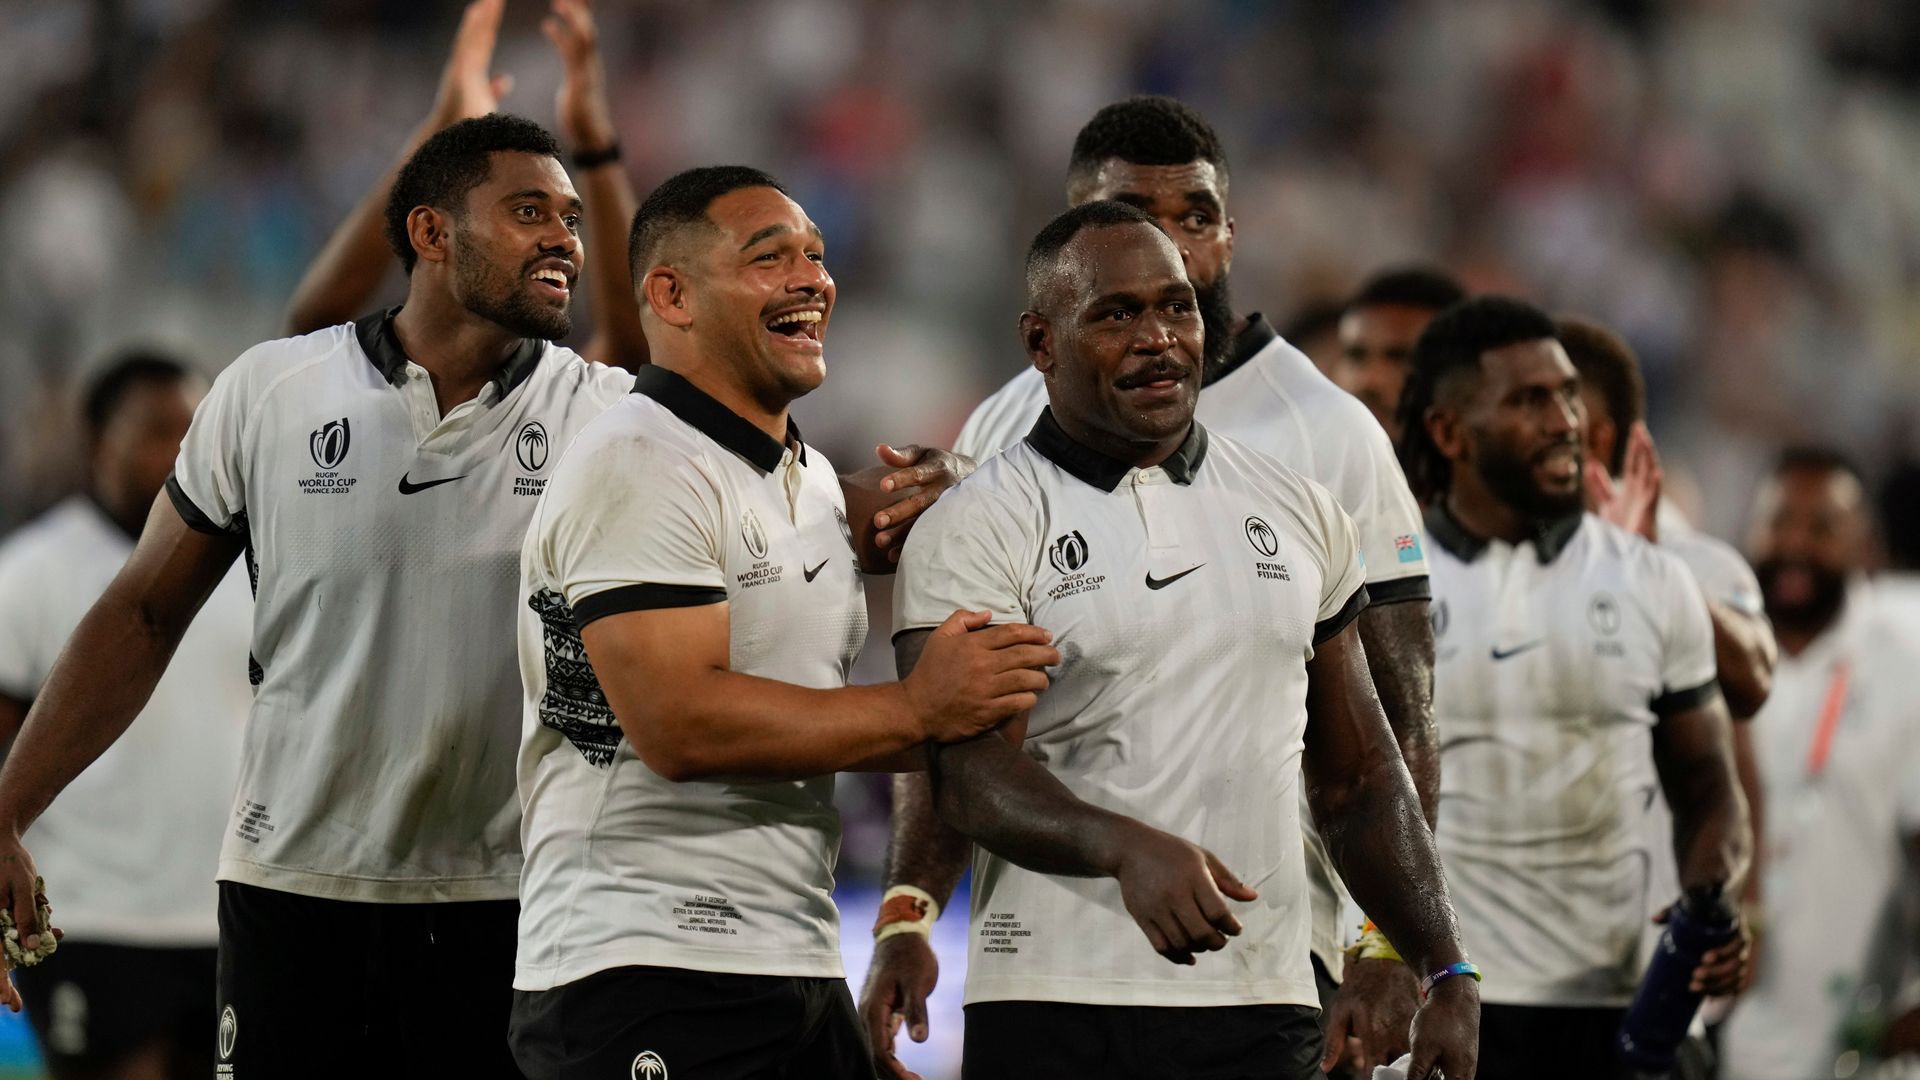 Fiji fight back from behind to beat Georgia